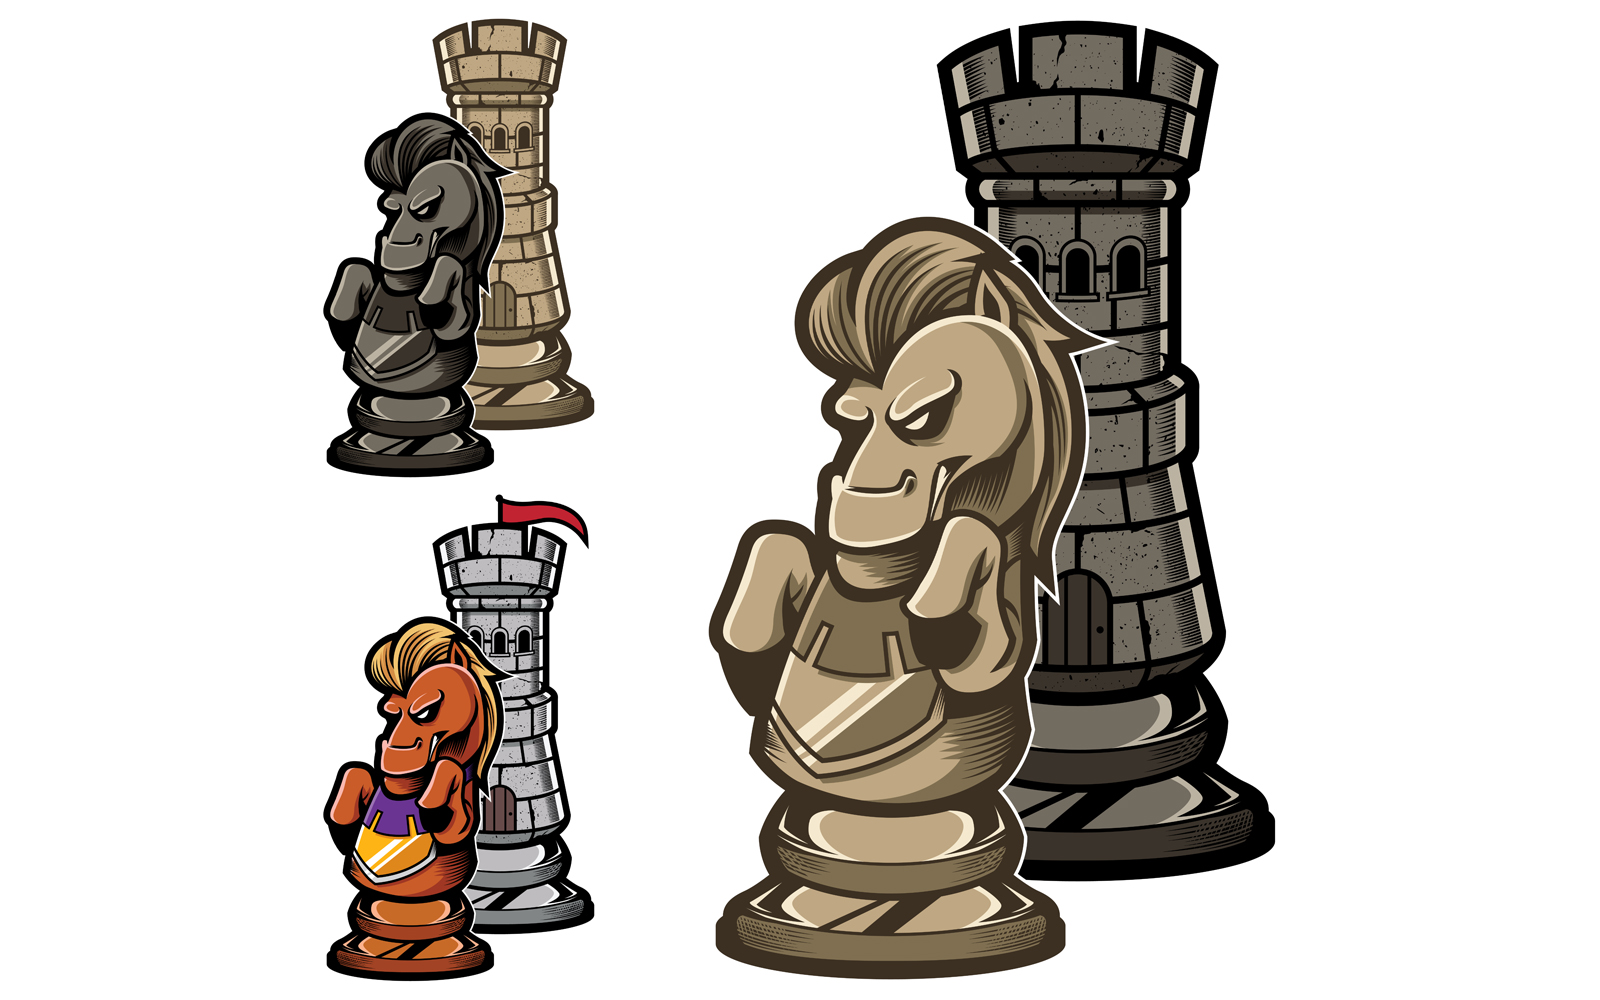 Chess Rook and Knight - Illustration